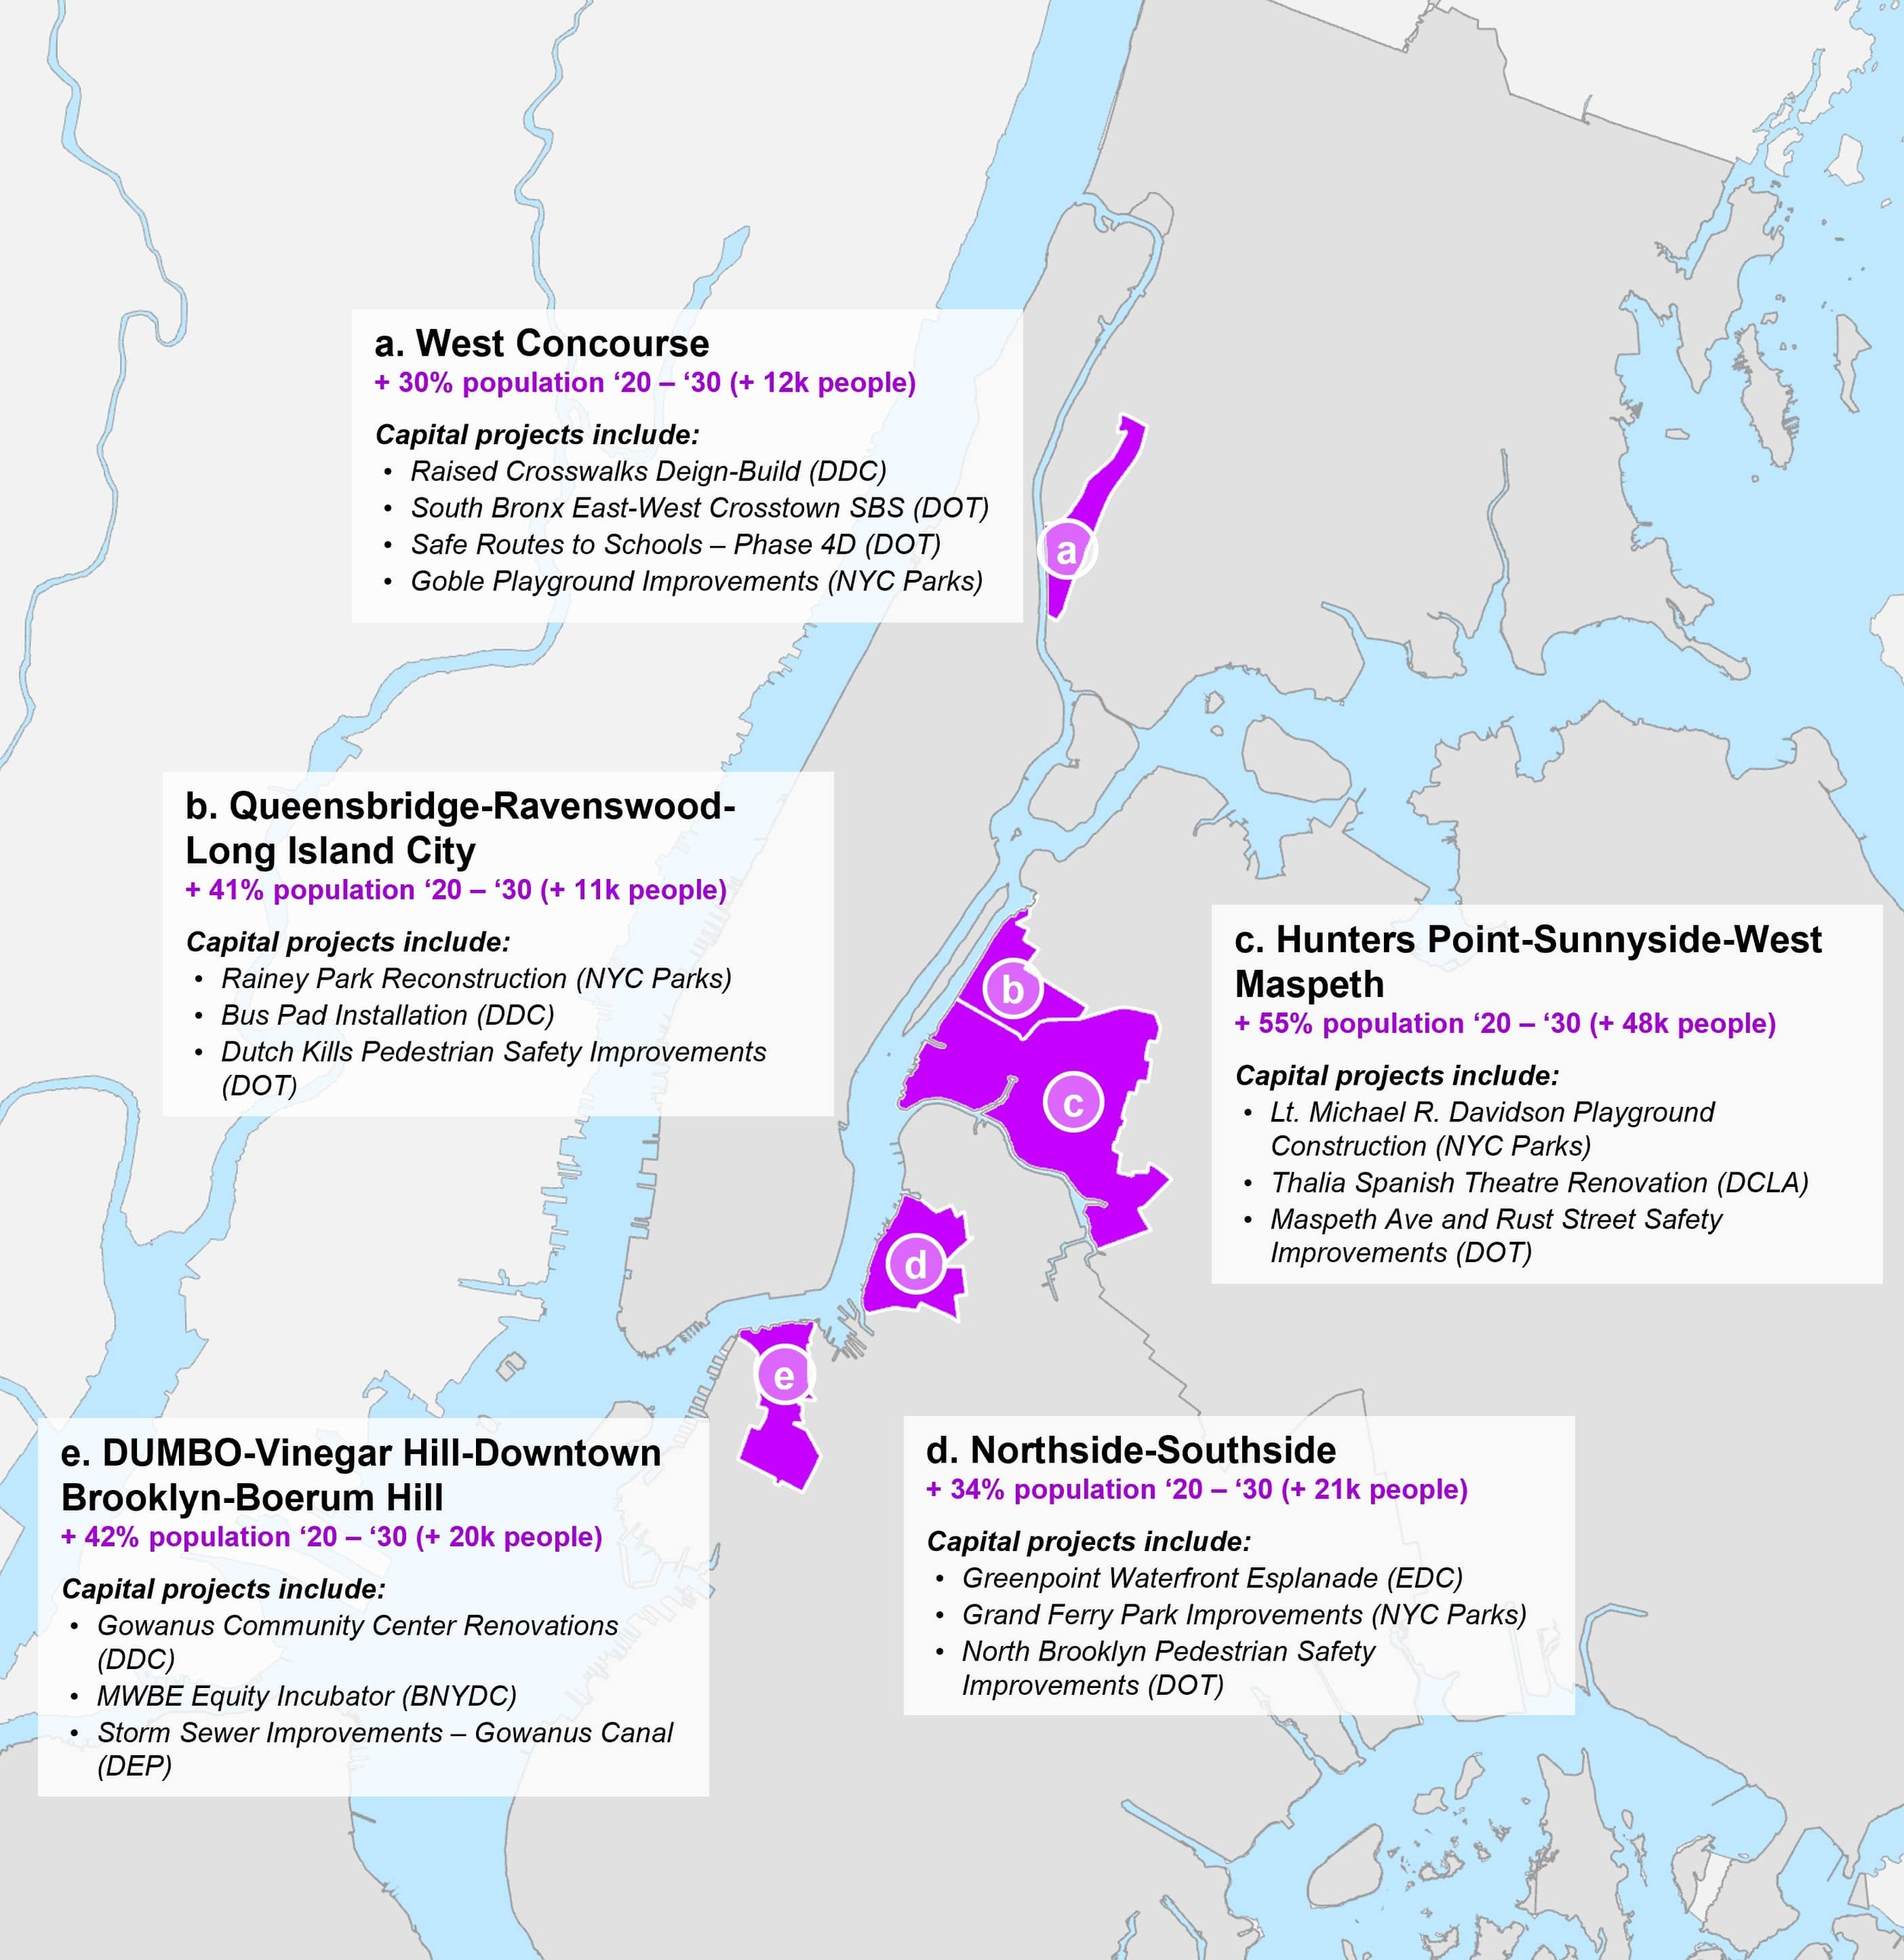 A map of projected population growth in 5 neighborhoods in New York City. The West Concourse neighborhood in the Bronx is projected to have 30% population growth, approximately 12,000 people. ; Queensbridge Ravenswood-Long Island City in Queens is projected to have 41% population growth, approximately 11,000 people, ; Hunters Point-Sunnyside-West Maspeth in Queens is projected to have 55% population growth, approximately 48,000 people; Northside-Southside in Williamsburg, Brooklyn is projected to have 34% population growth, approximately 21,000 people; and Dumbo-Vinegar Hill-Downtown Brooklyn-Boerum Hill in Brooklyn is projected to have 42% population growth, approximately 20,000 people. Courtesy of NYC Planning.